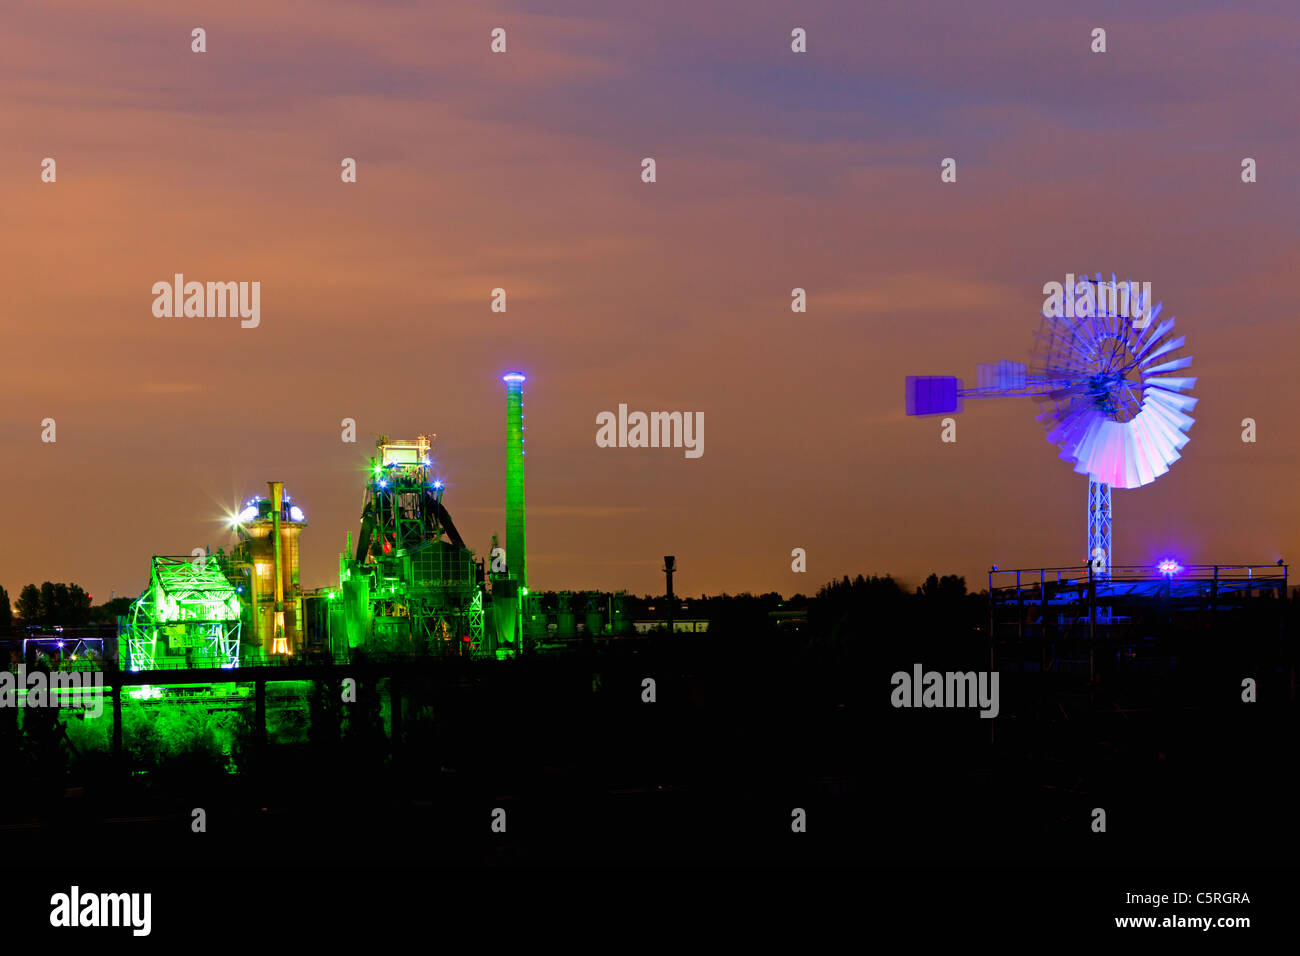 Germany Illuminated blast furnace and wind mill of industrial plant at night Stock Photo